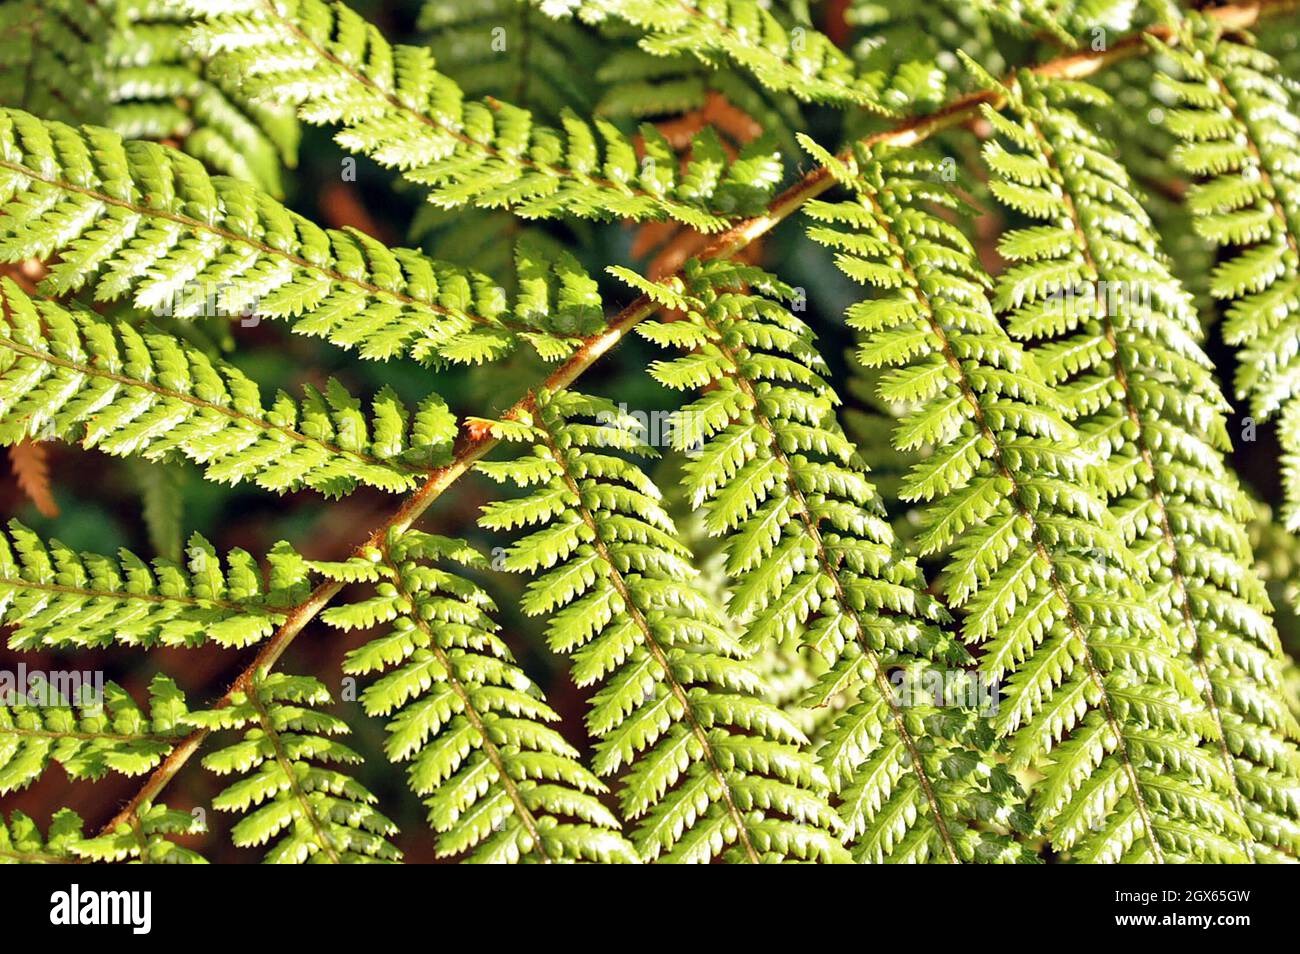 The silver fern, endemic to New Zealand, is symbolic and a source of identity for New Zealanders.  The fern was used historically by the Maori to mark night trails.  The flip-side of the green fern appears silver in the moonlight thus providing trail markings. Stock Photo